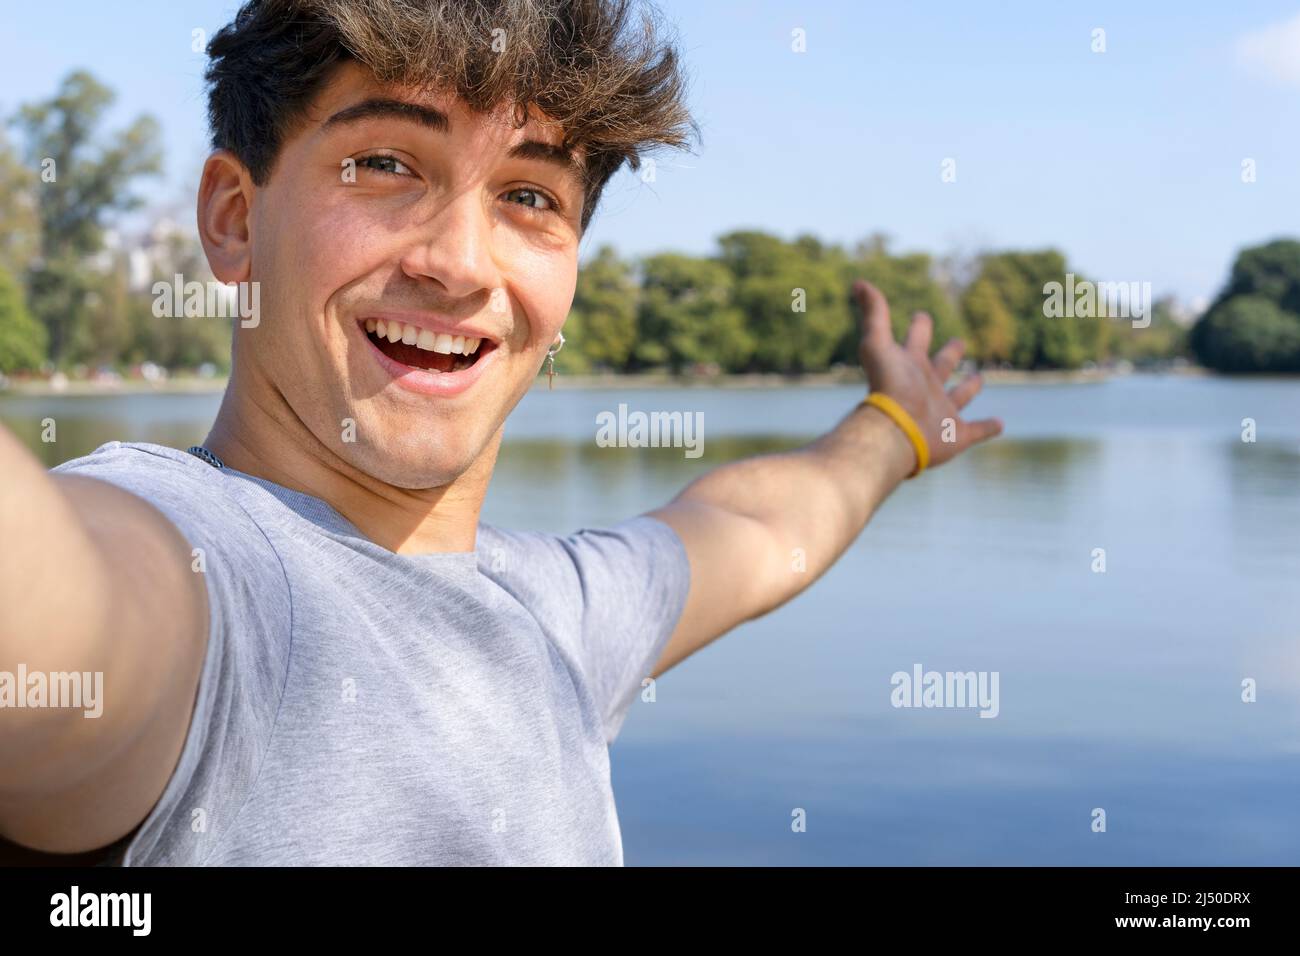 Active handsome young Caucasian man taking selfie showing around at a lake. Outdoor adventure concept. Stock Photo